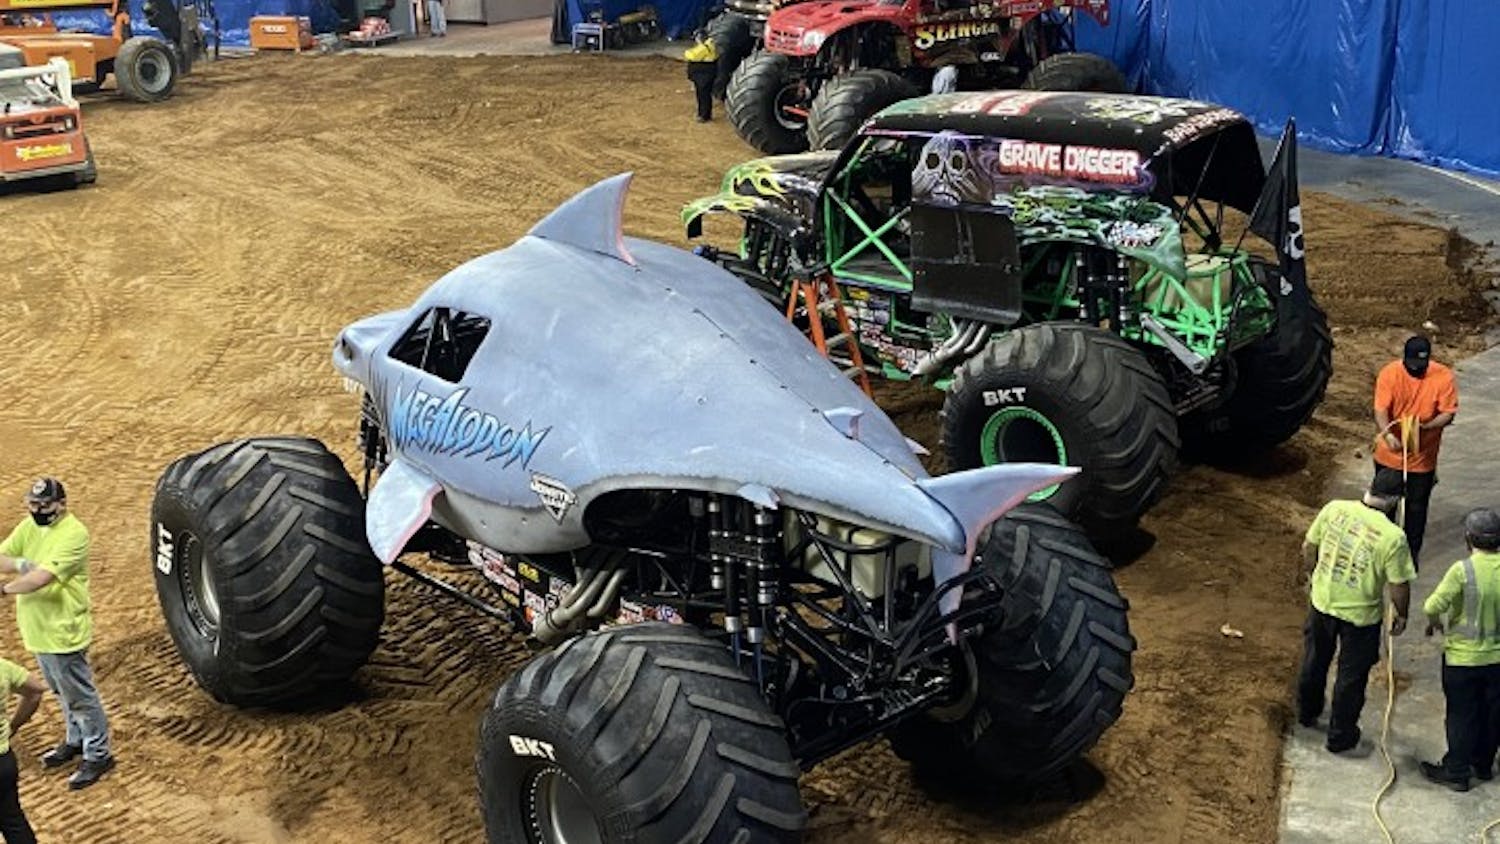 A row of monster trucks sit inside of Colonial Life Arena during Monster Jam's visit to Columbia.